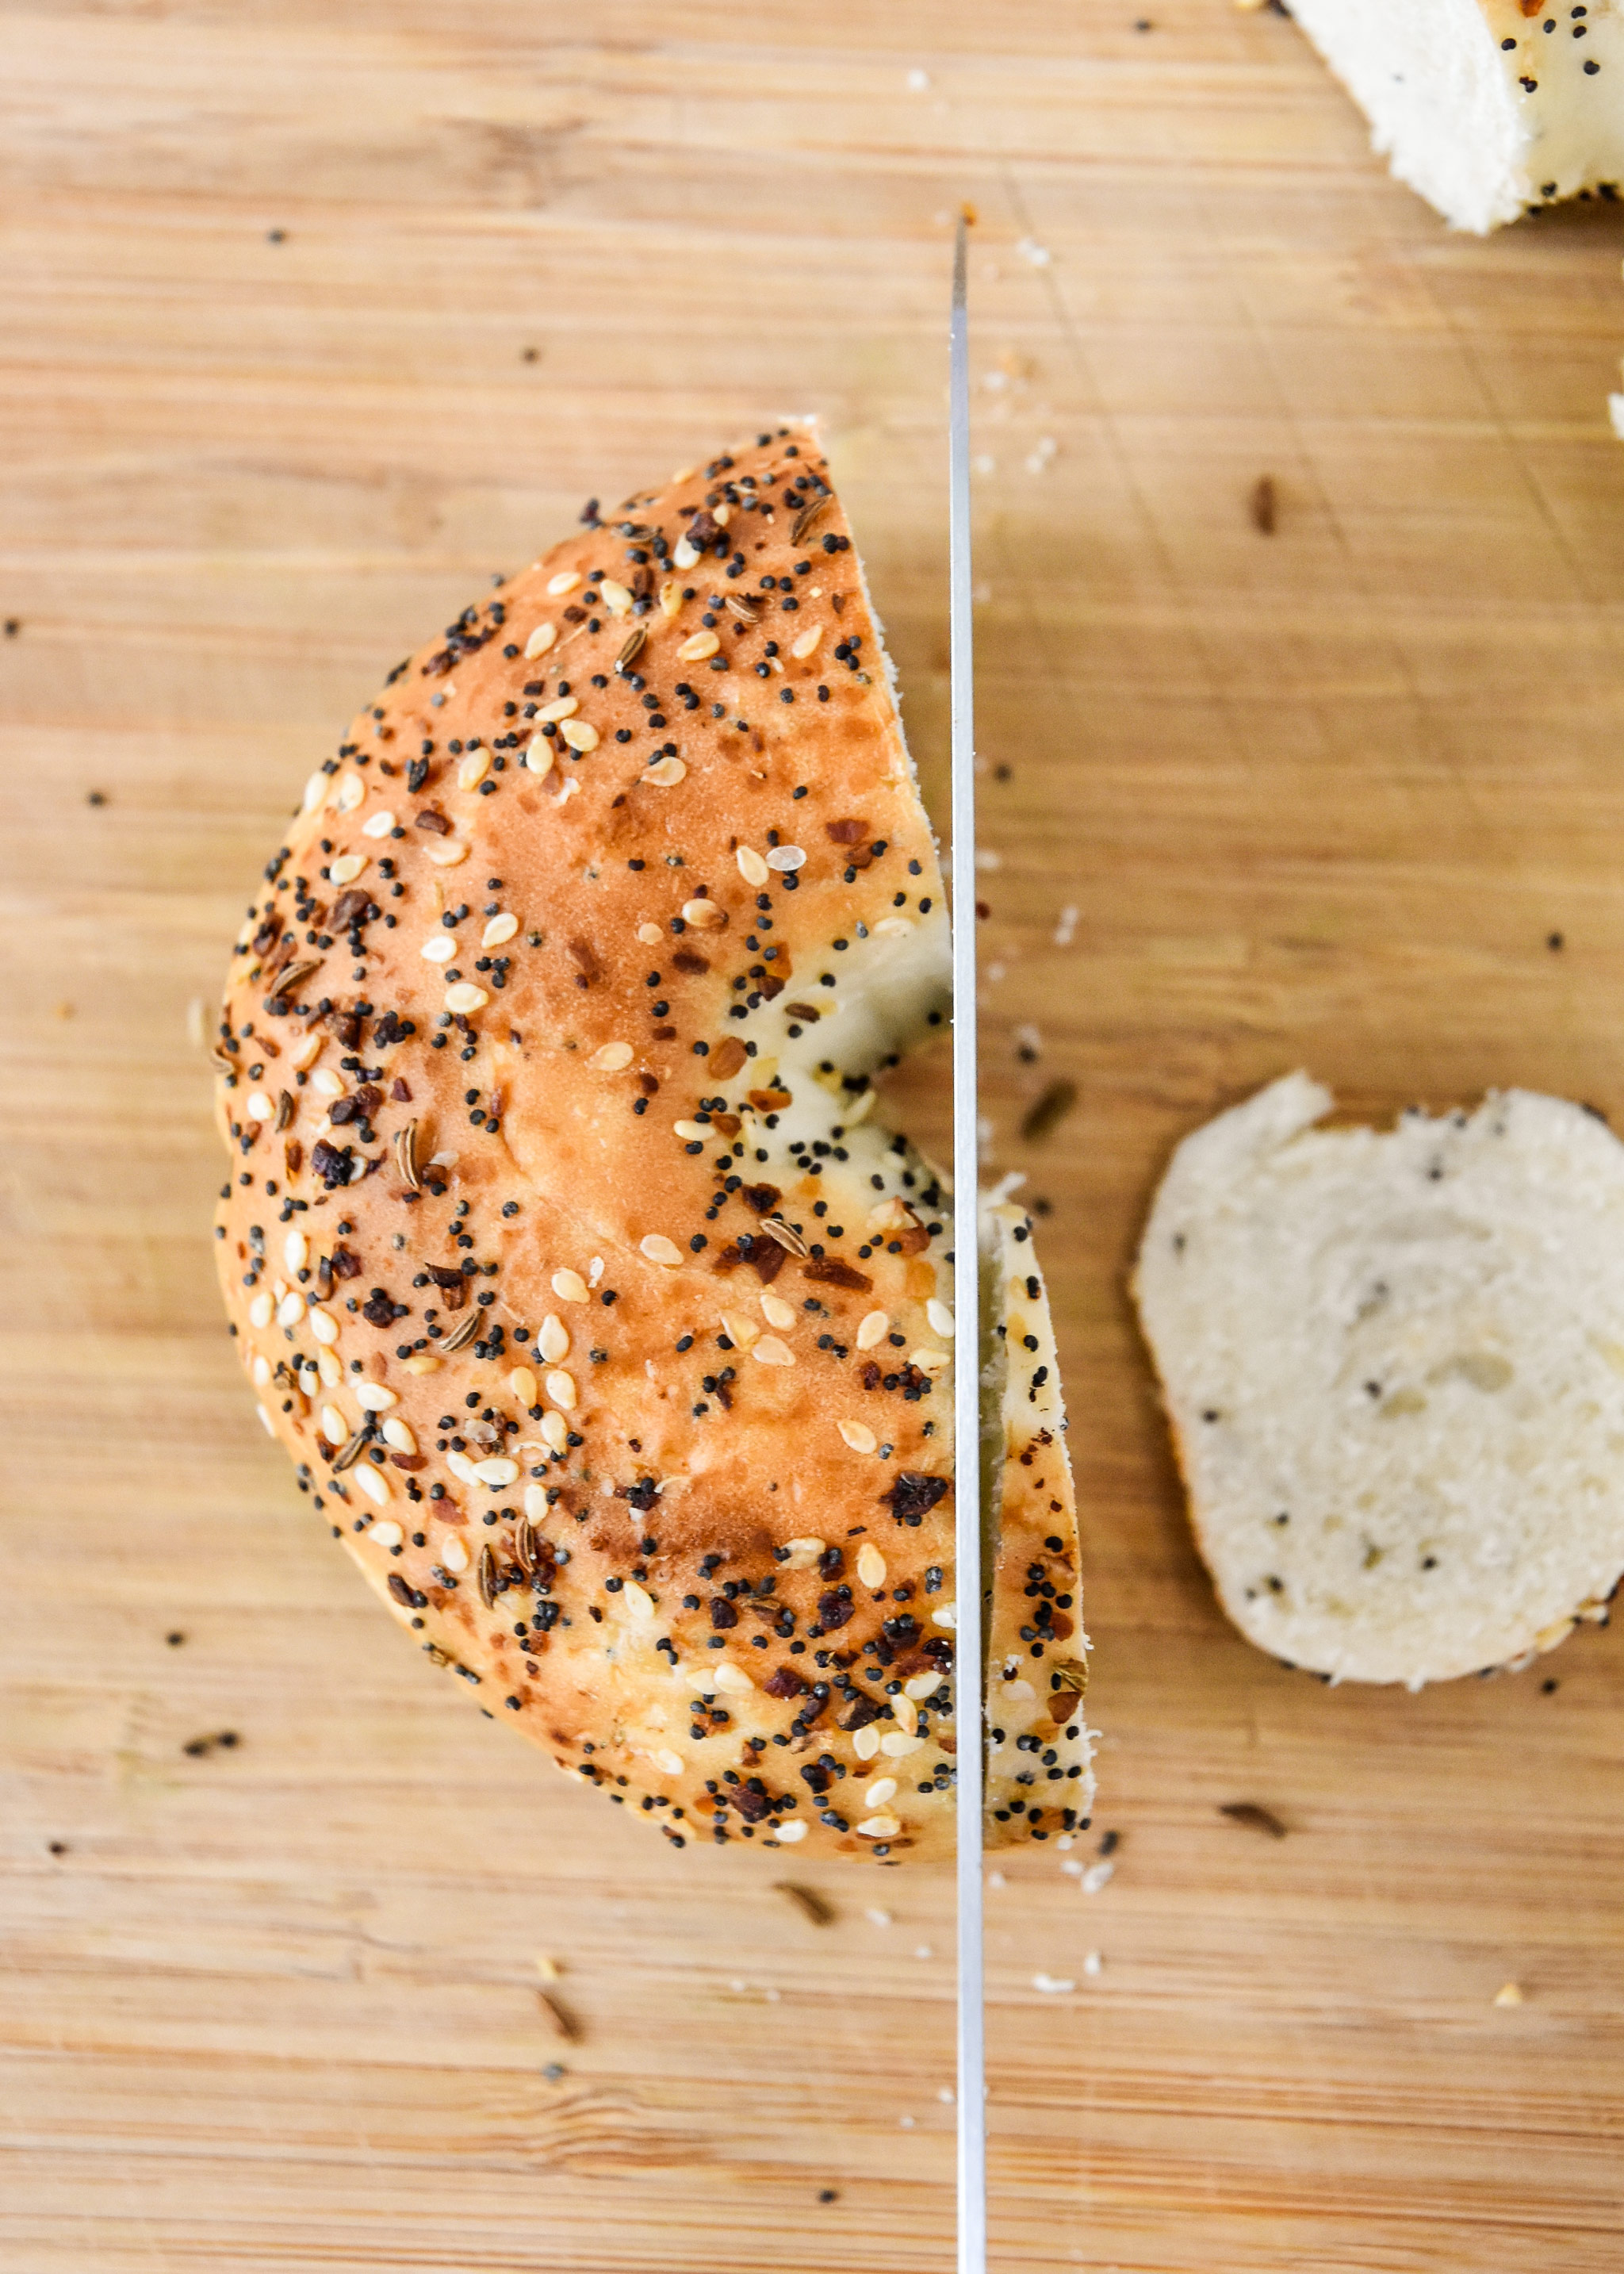 how to cut the bagel with a bread knife.